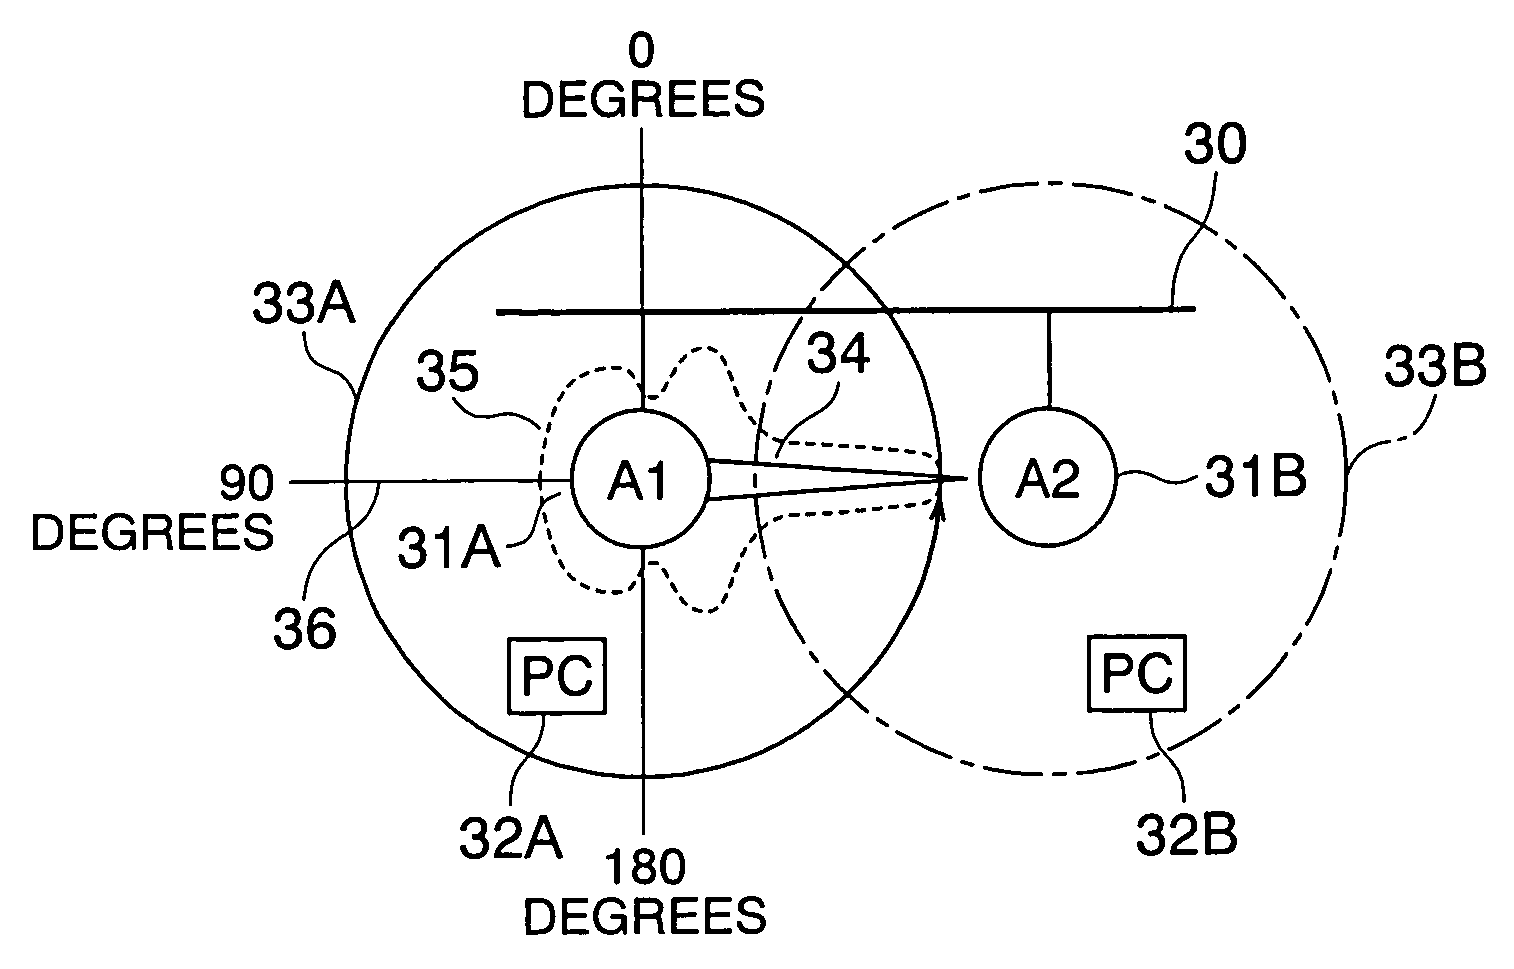 Radio base station for wirelessly communicating with a radio terminal